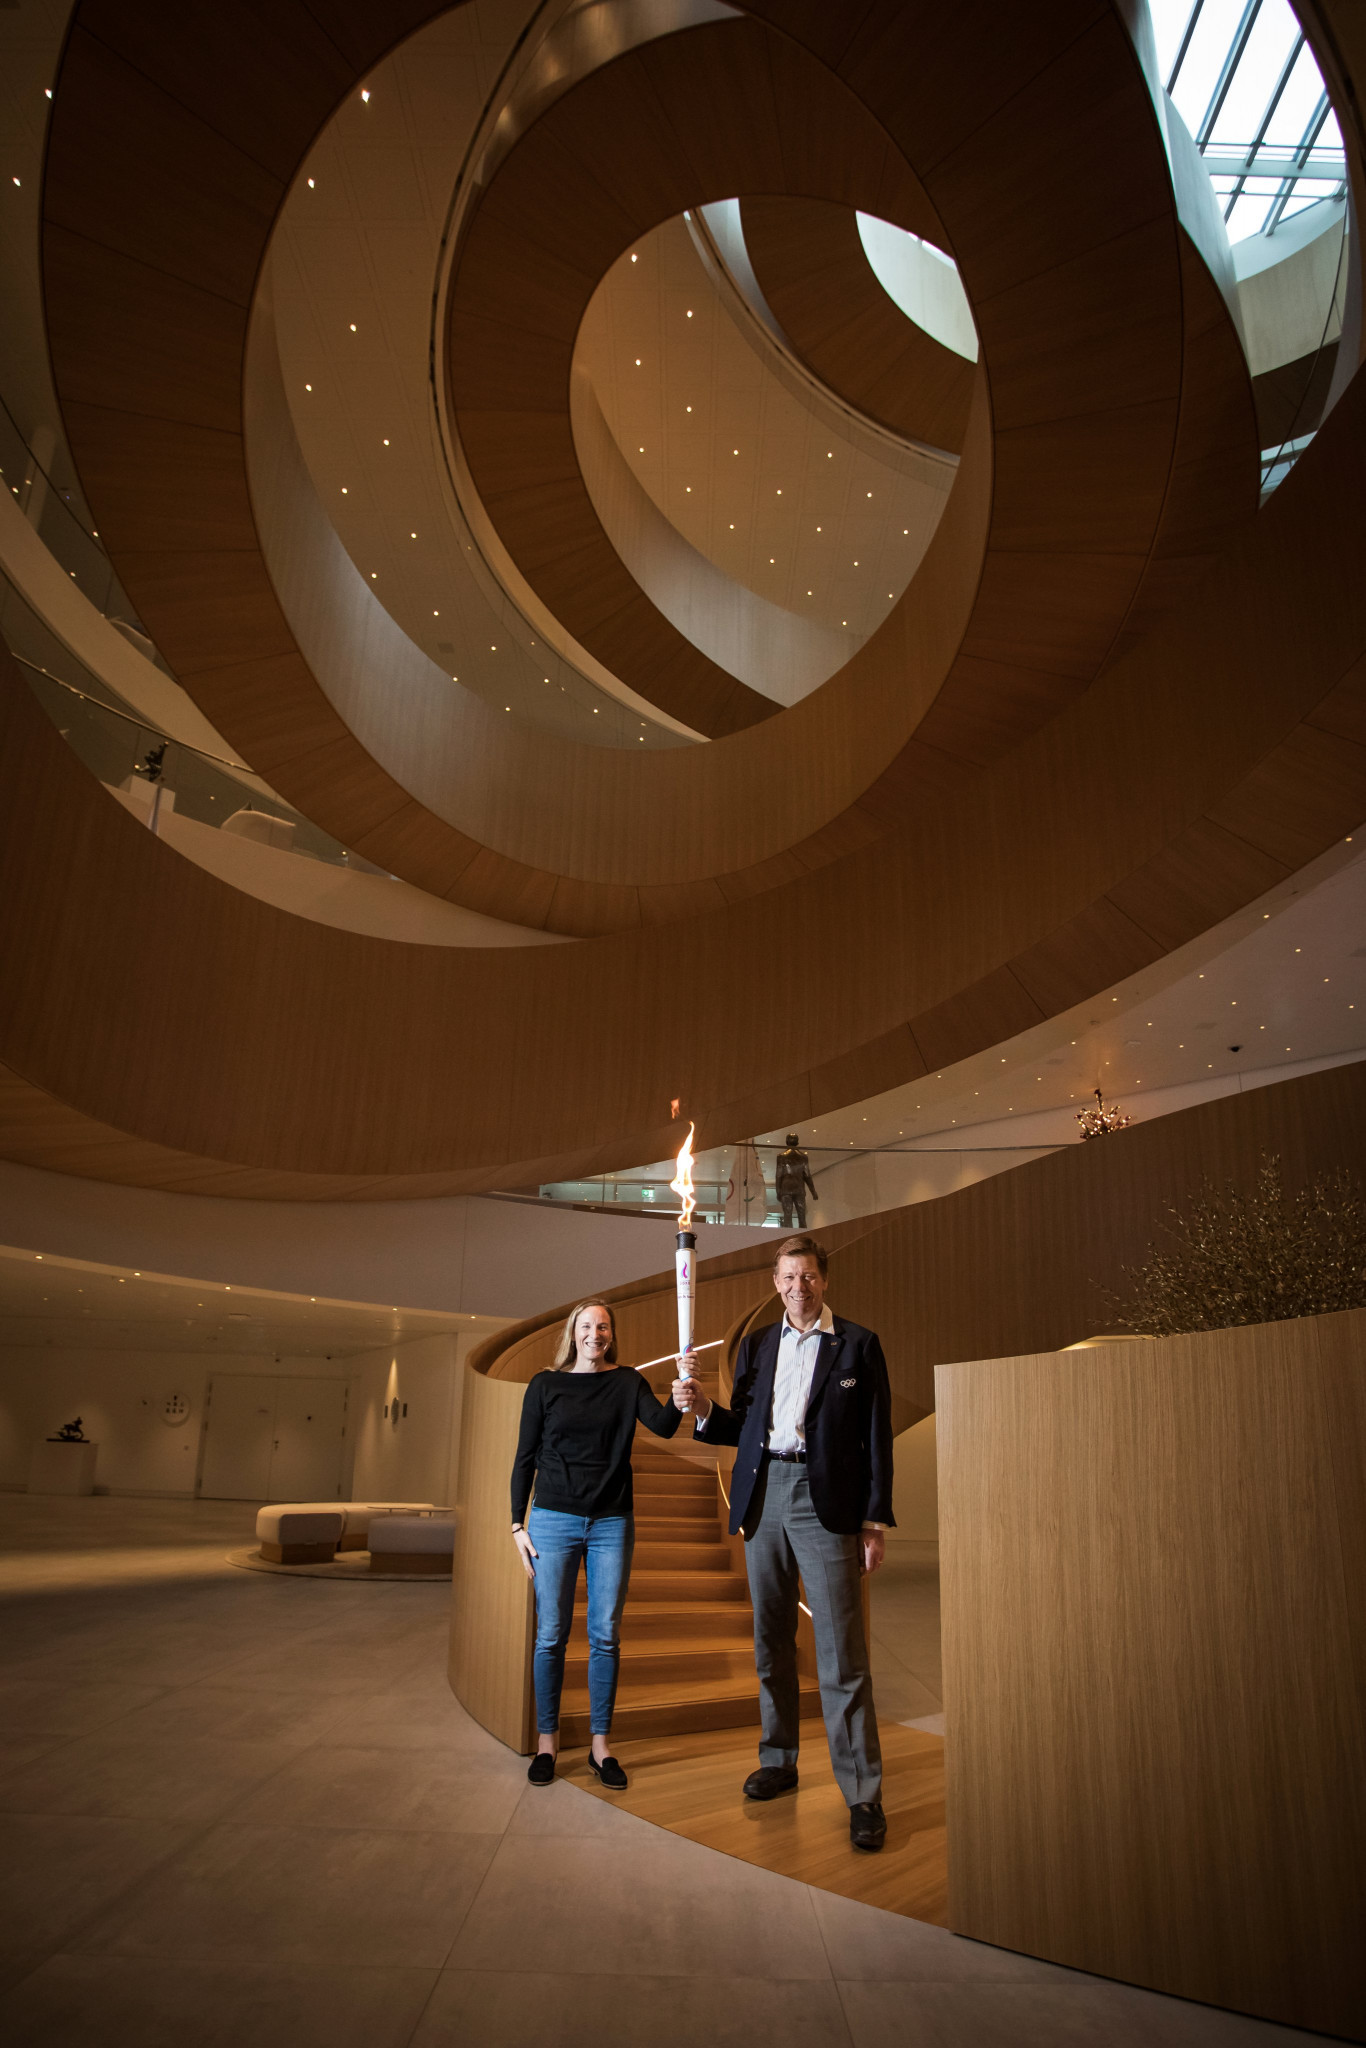 Two International Olympic Committee representatives welcomed the Torch to Olympic House ©Lausanne 2020